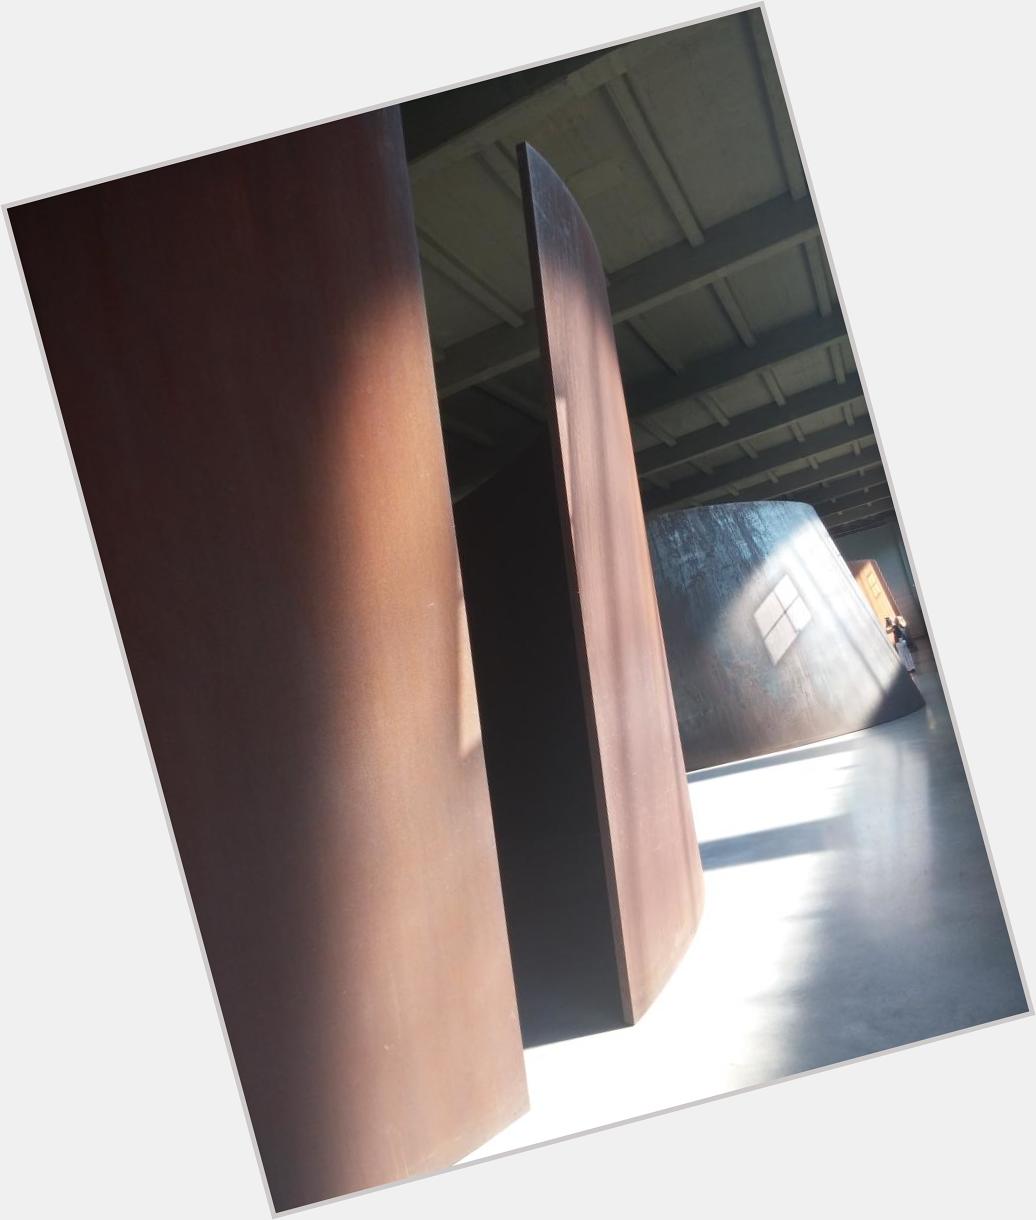 Happy bday to the amazing Richard Serra! Pic from our team excursion to  